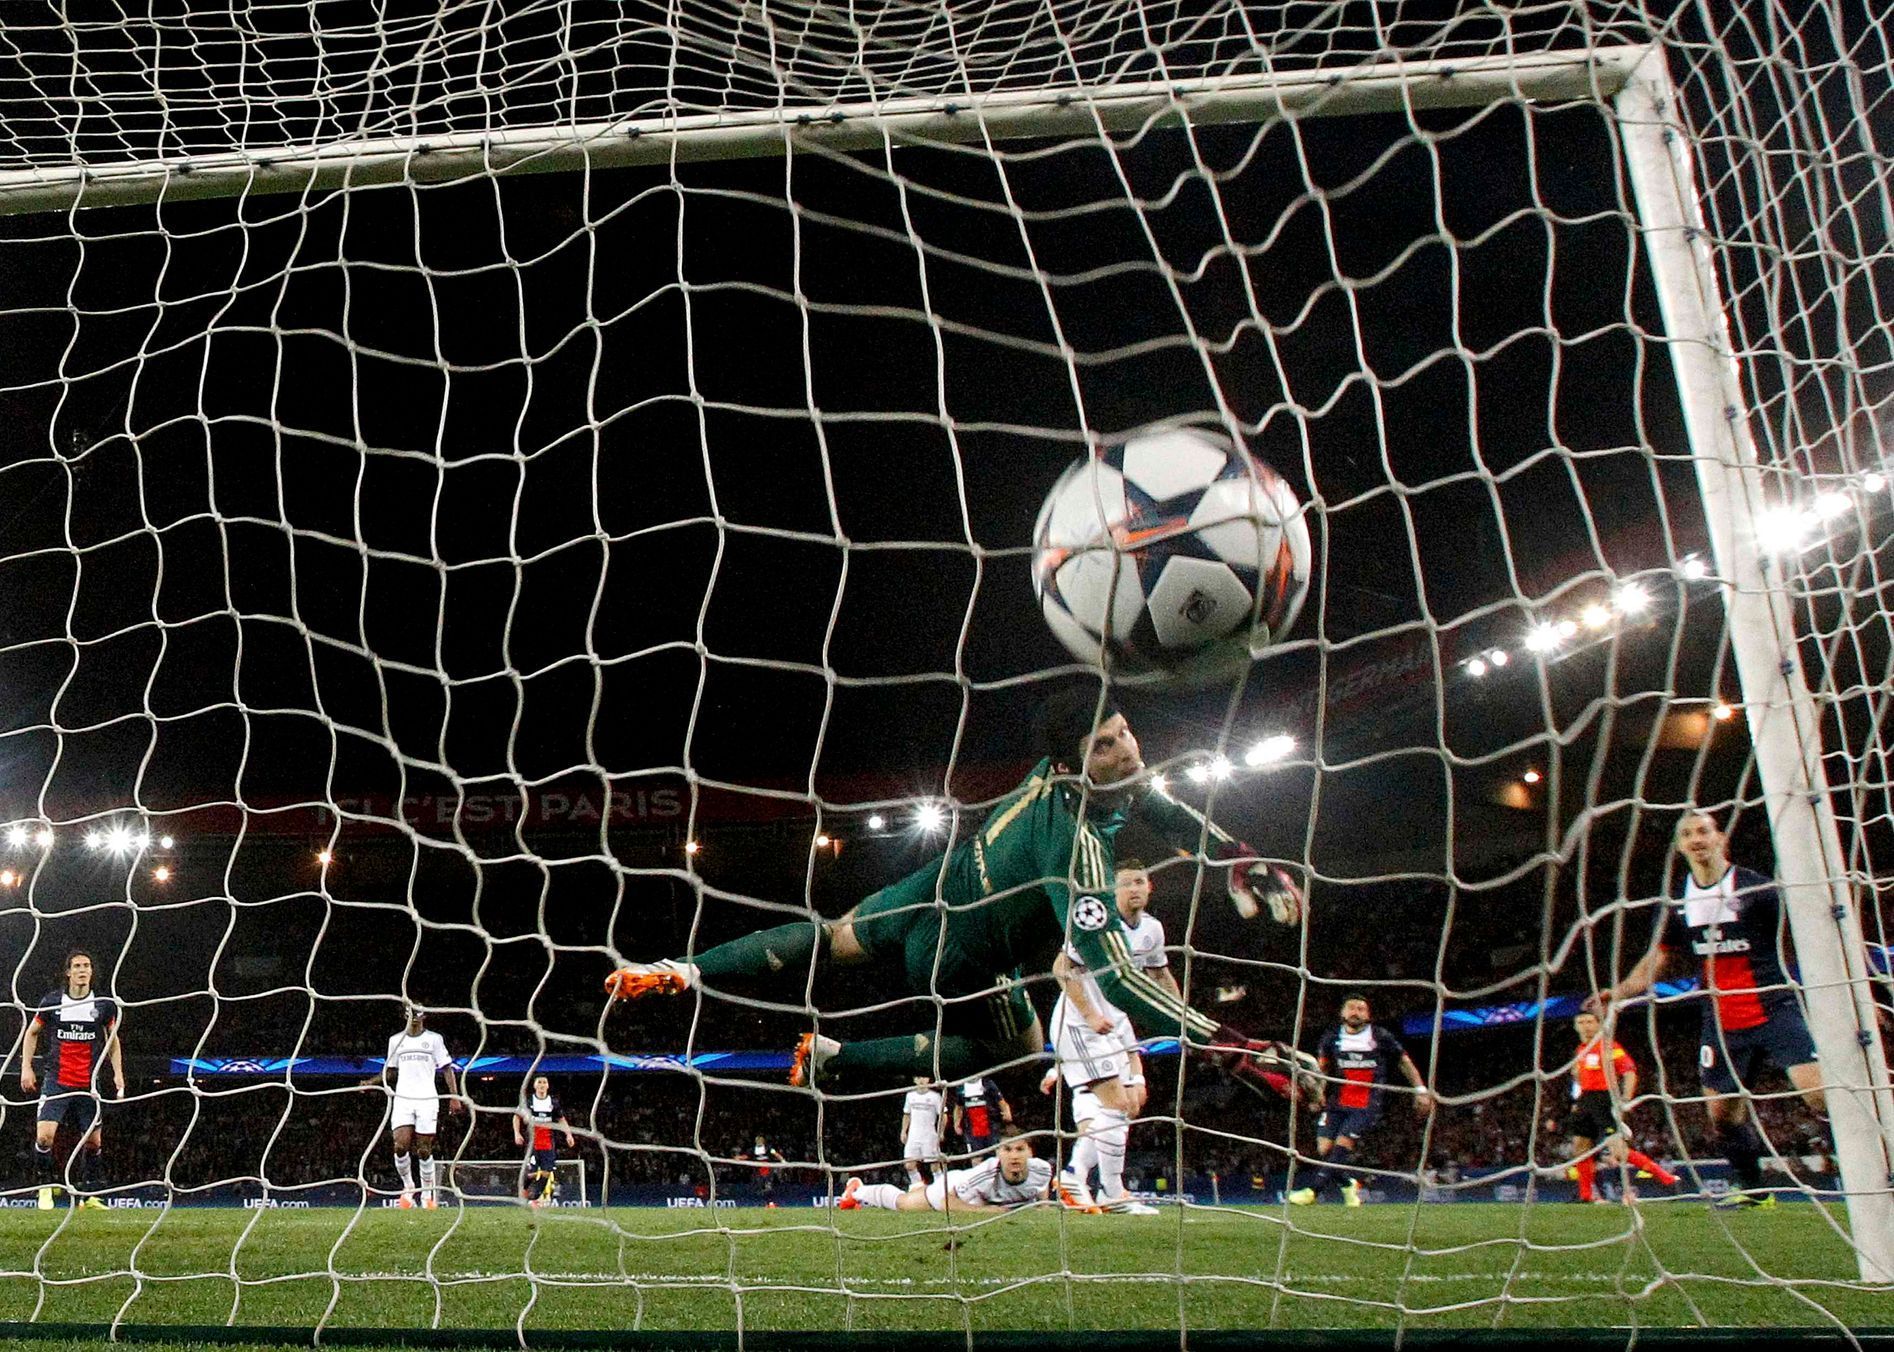 Chelsea goalkeeper Cech fails to catch the ball as Paris St Germain's Lavezzi scored the first goal for the team during their Champions League quarter-final first leg soccer match against Chelsea at t